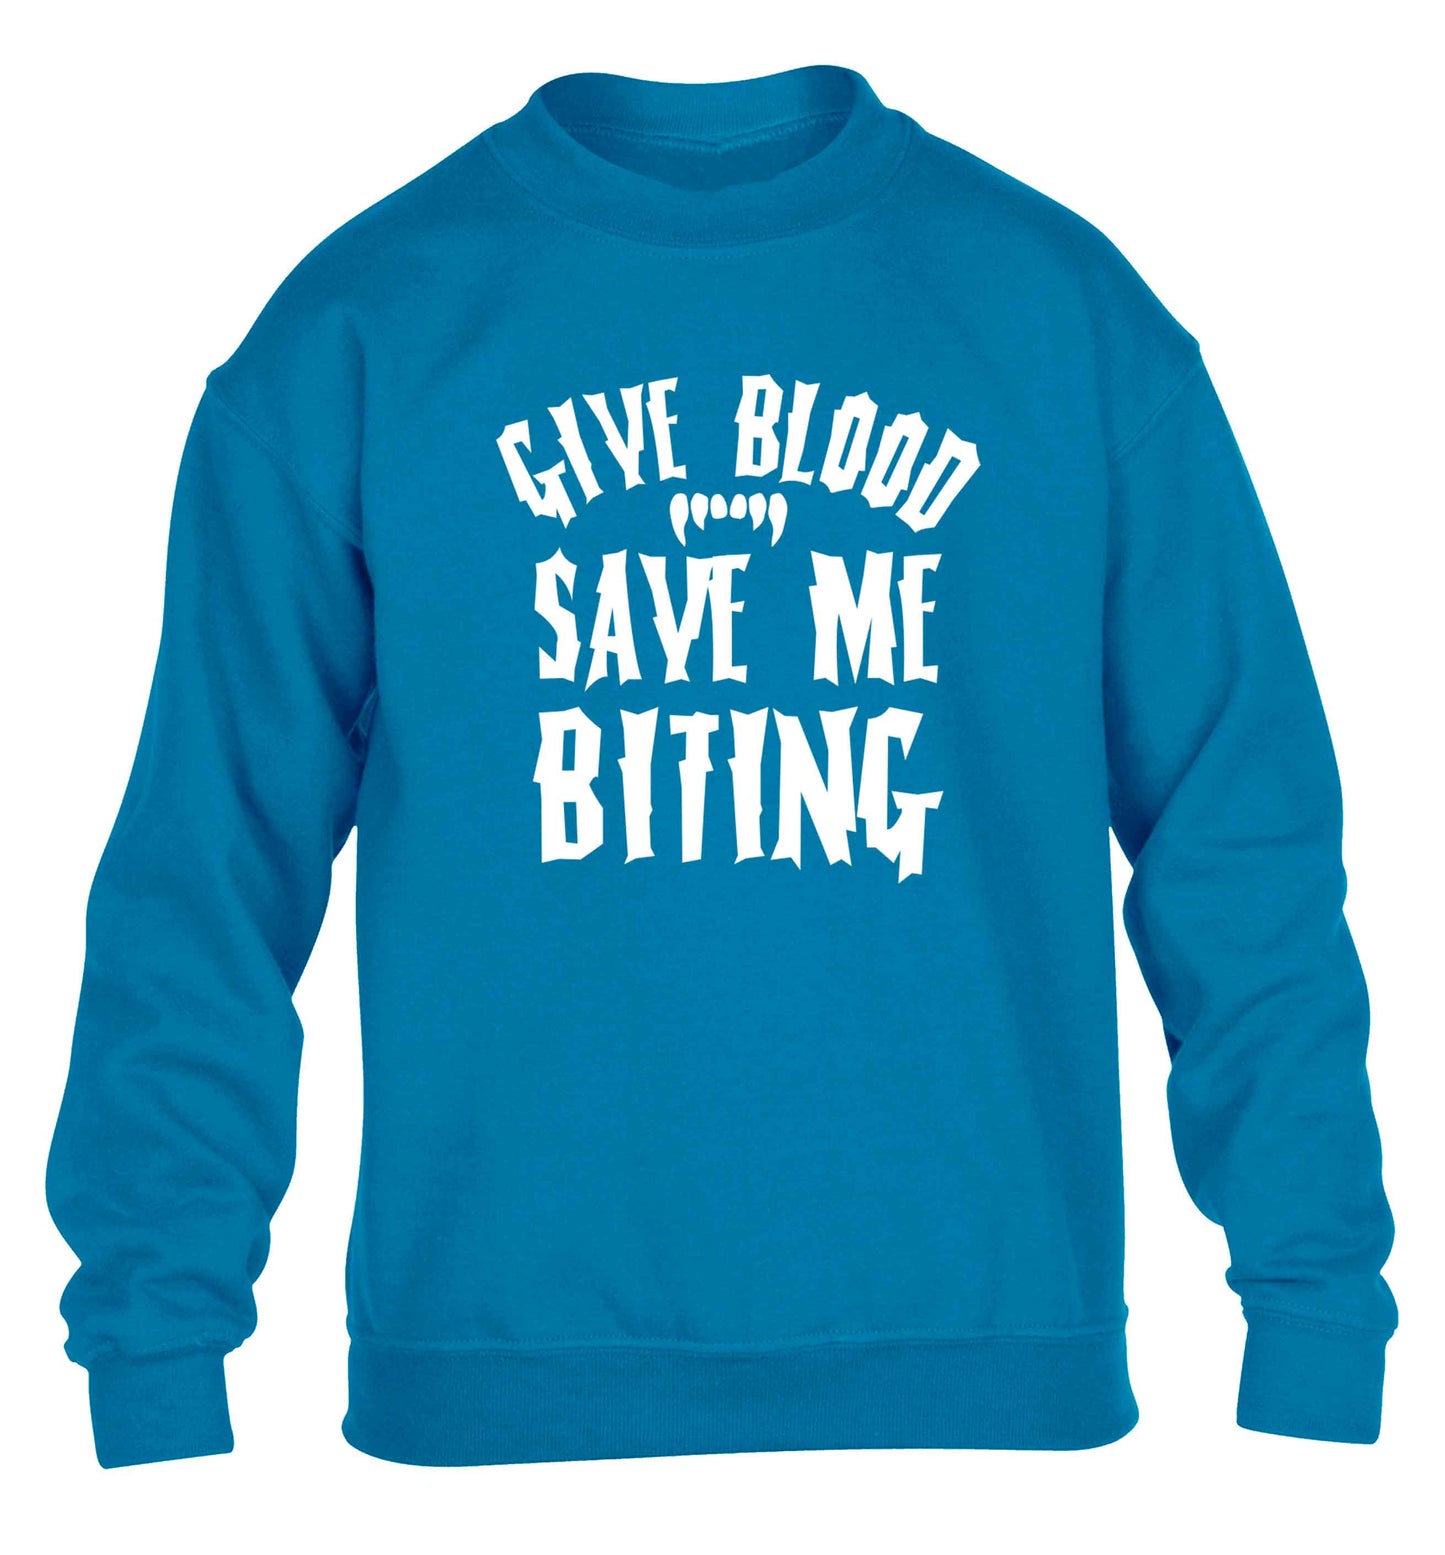 Give blood save me biting children's blue sweater 12-13 Years